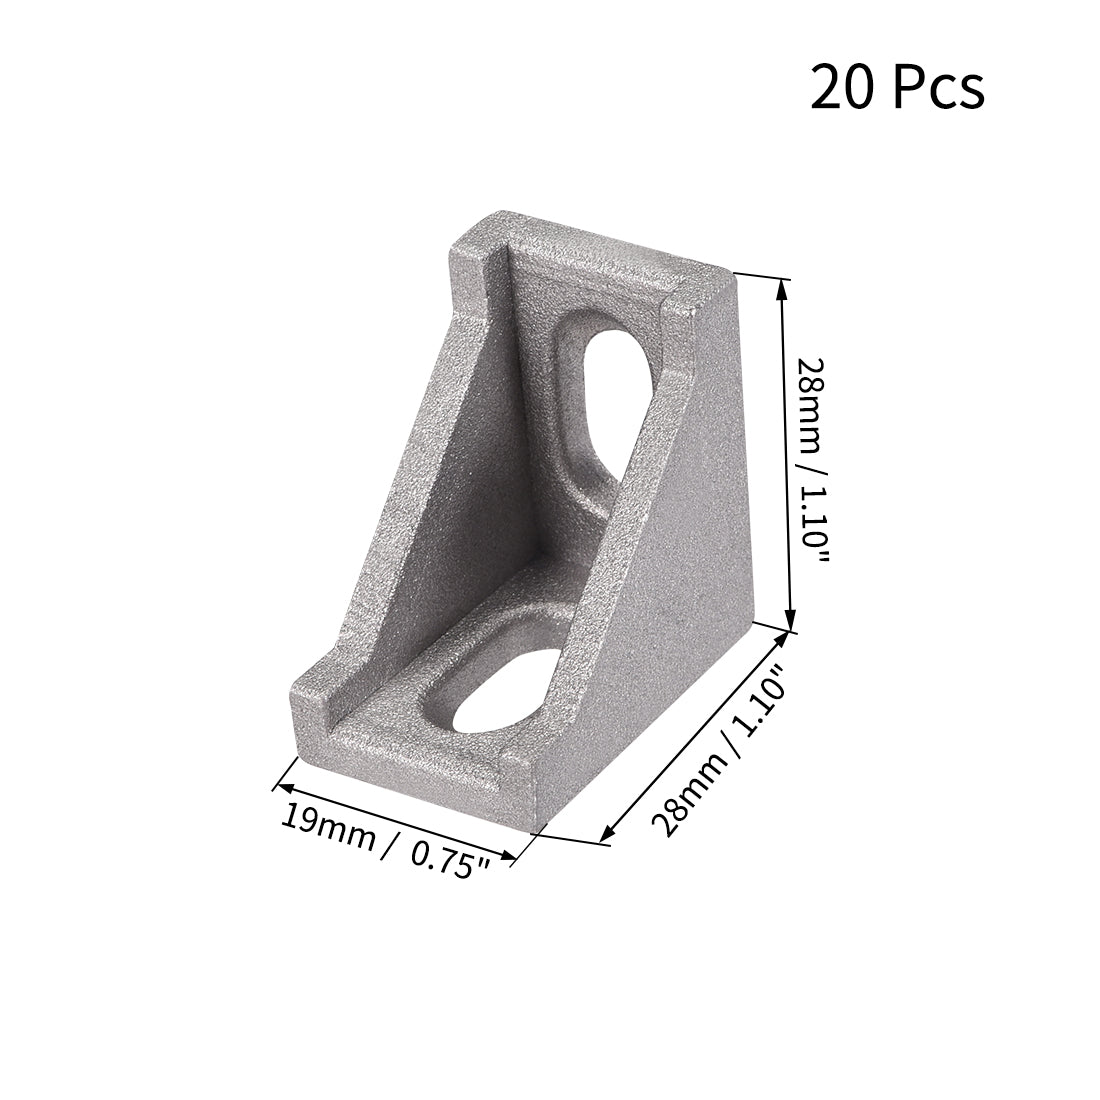 uxcell Uxcell Inside Corner Bracket Gusset, 28mm x 28mm for 2020 Series Aluminum Extrusion Profile with Slot 6mm, 20 Pcs (Silver)